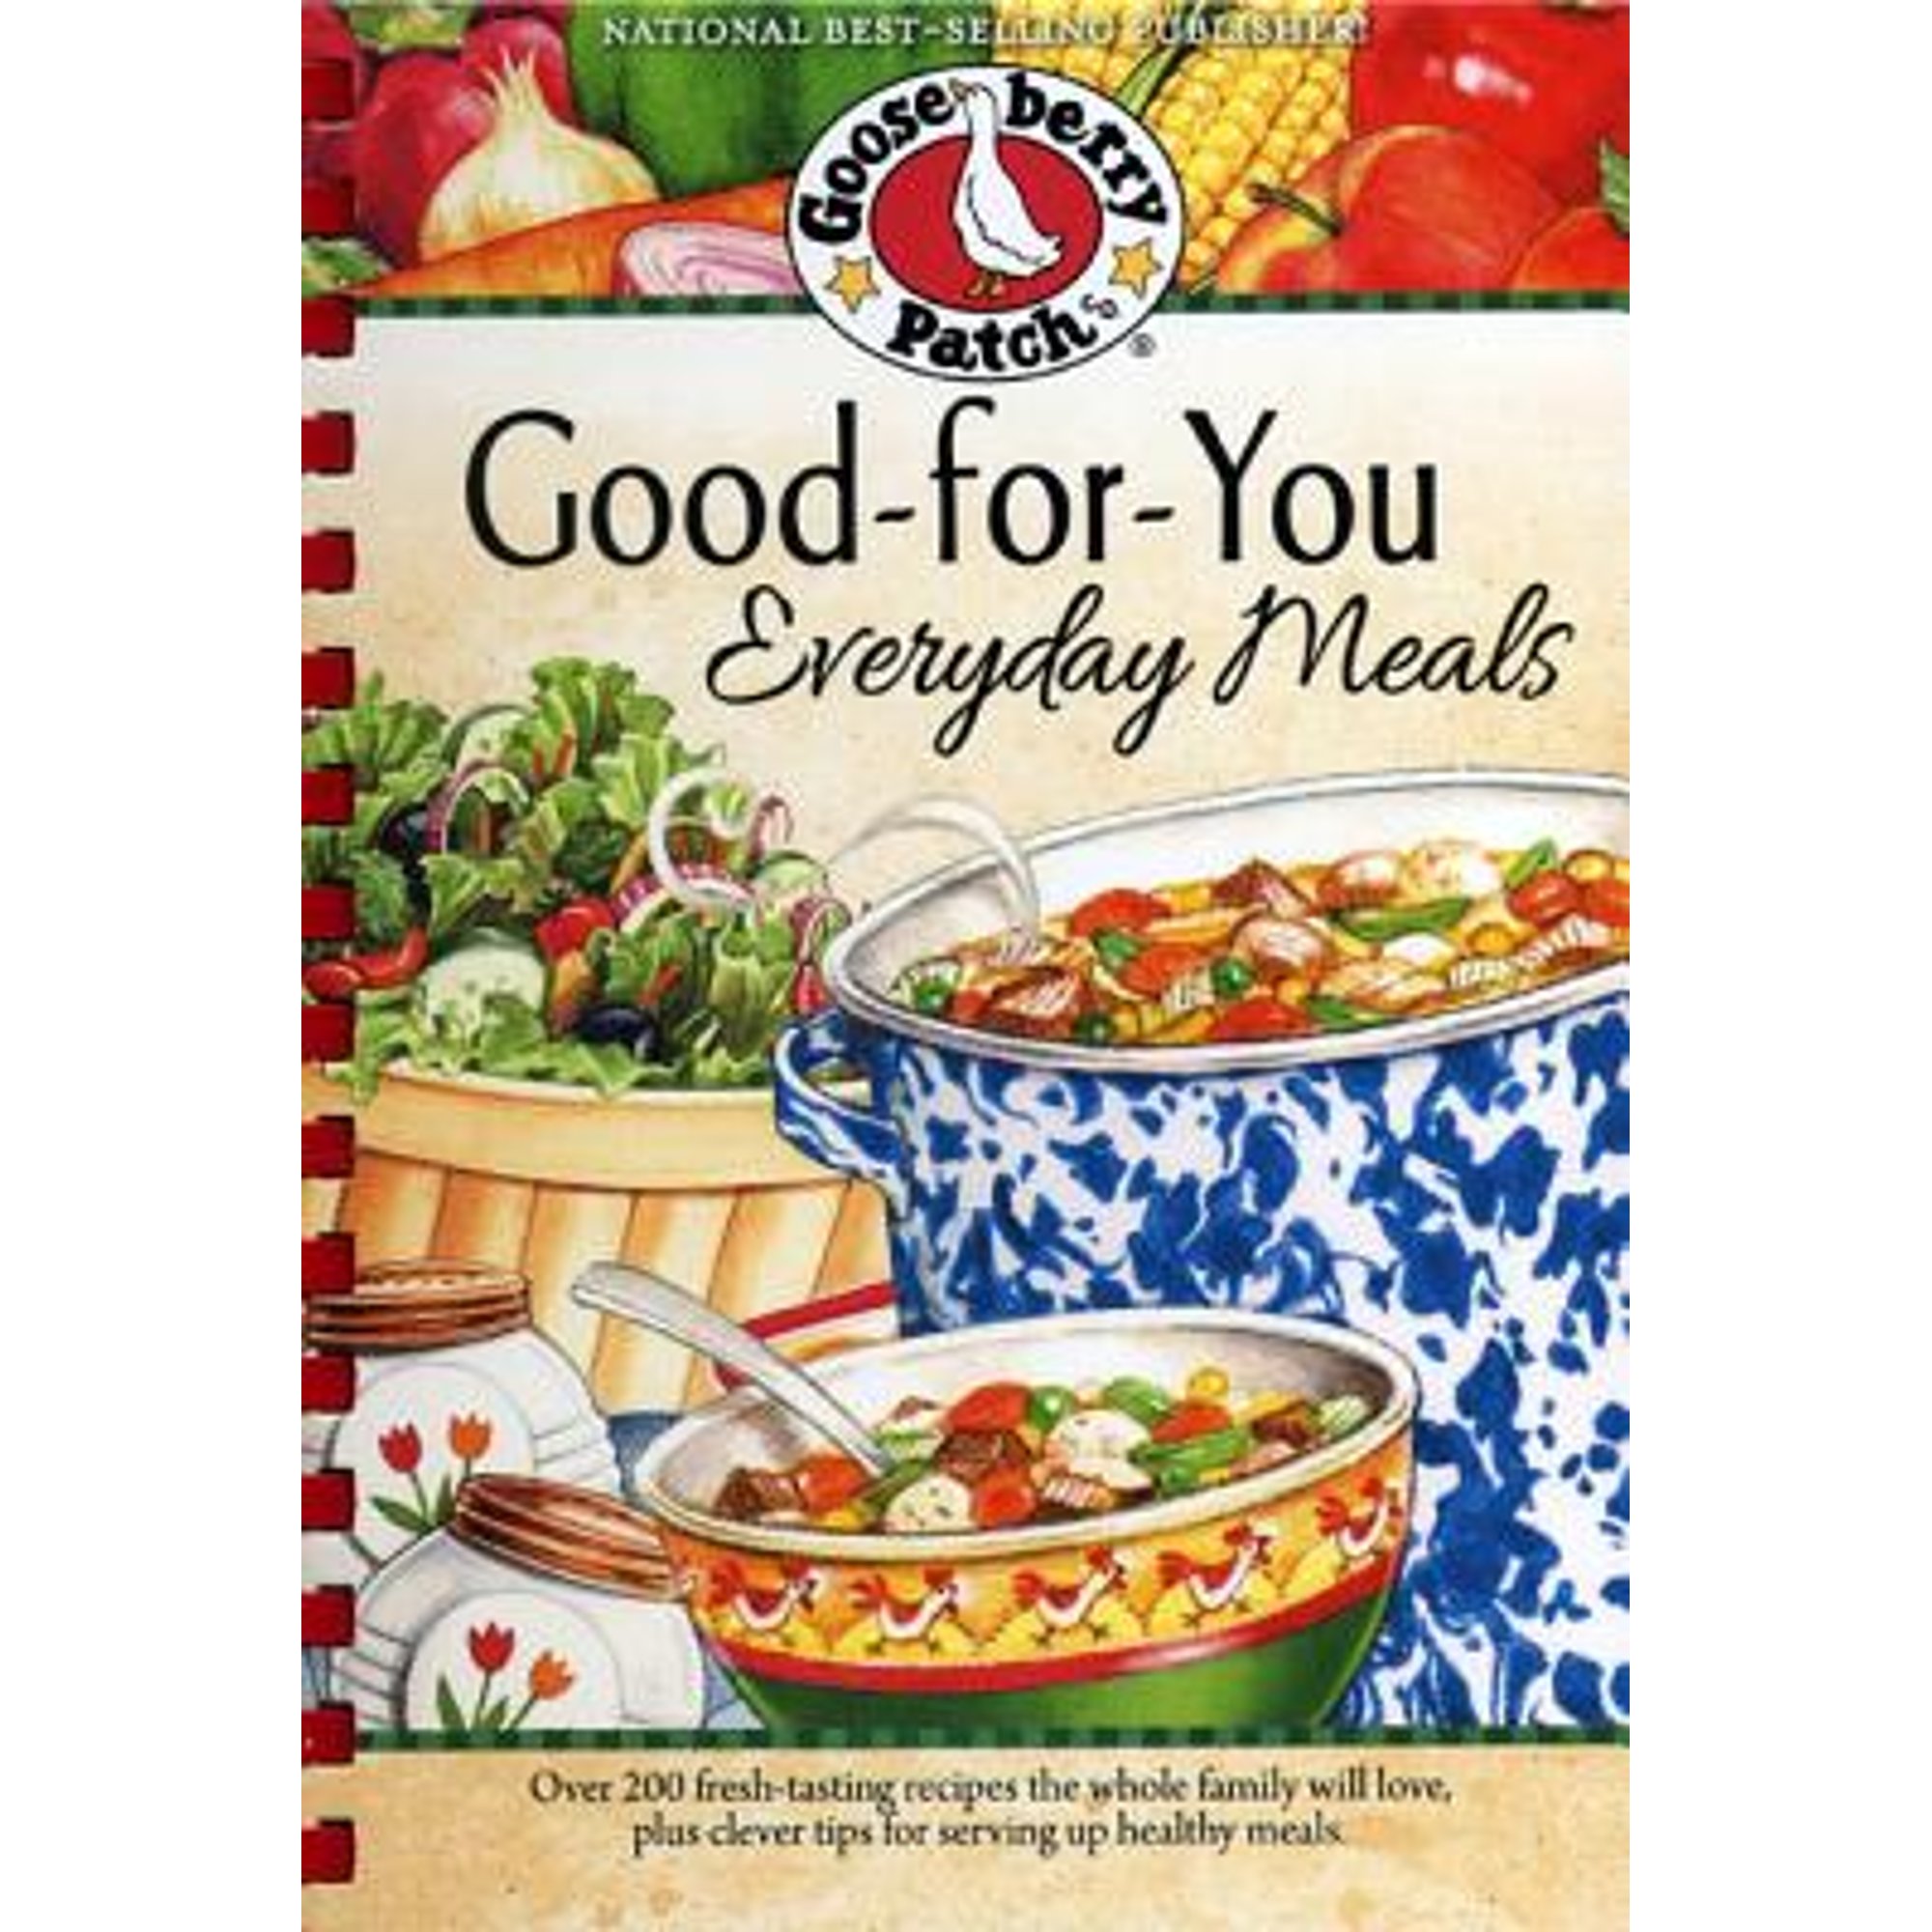 Good-For-You Everyday Meals (Hardcover) by Gooseberry Patch - image 1 of 1